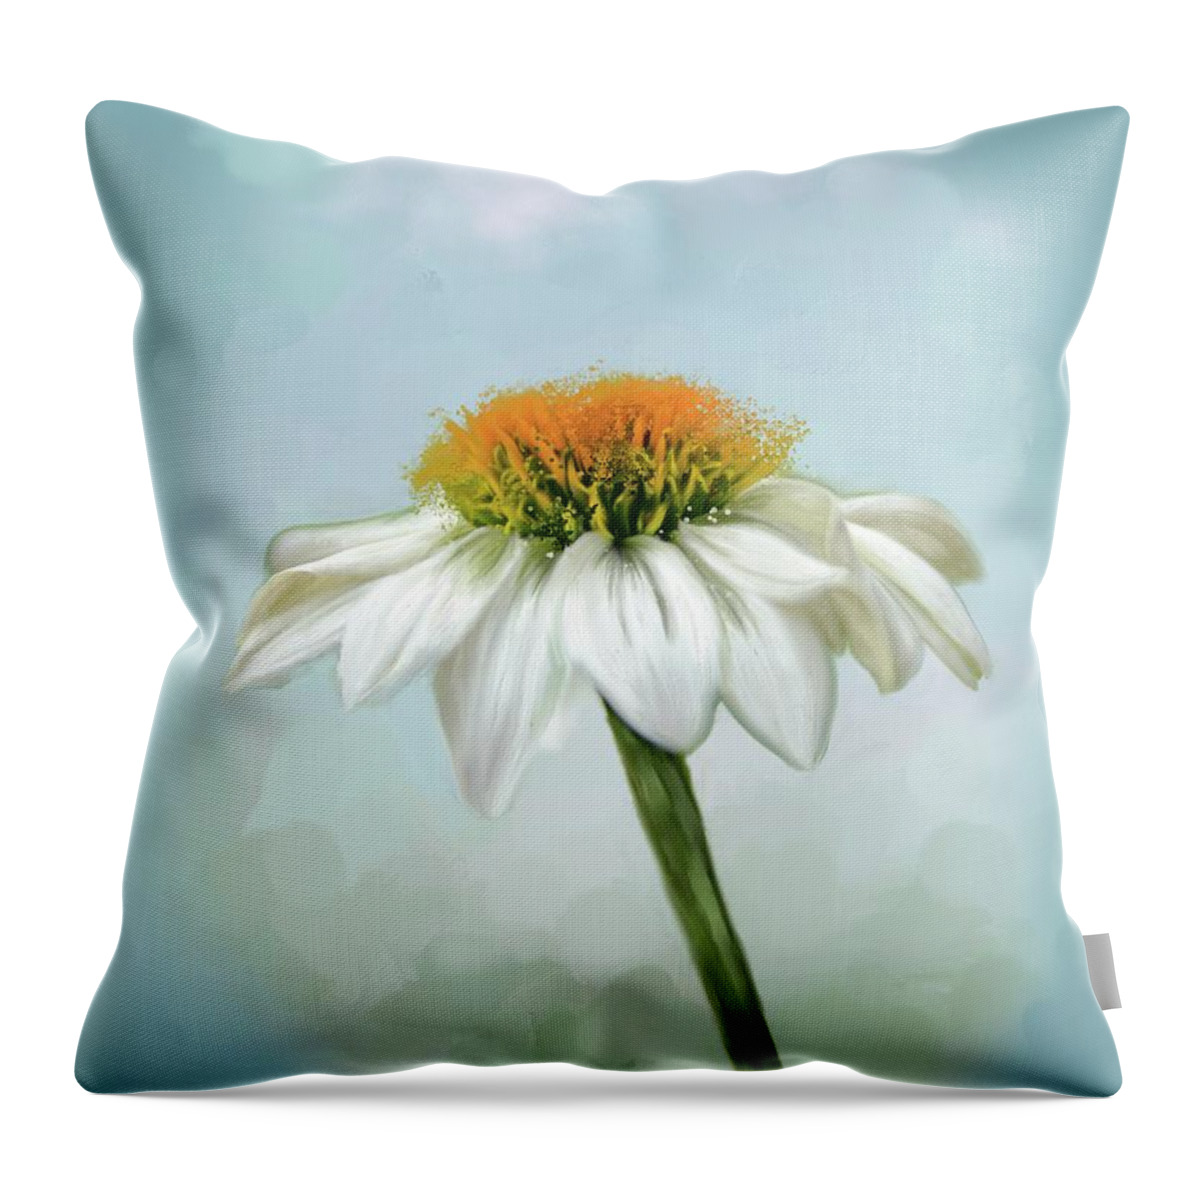 White Cone Flower With Orange Stamin Throw Pillow featuring the photograph Fresh Cone Flower by Mary Timman